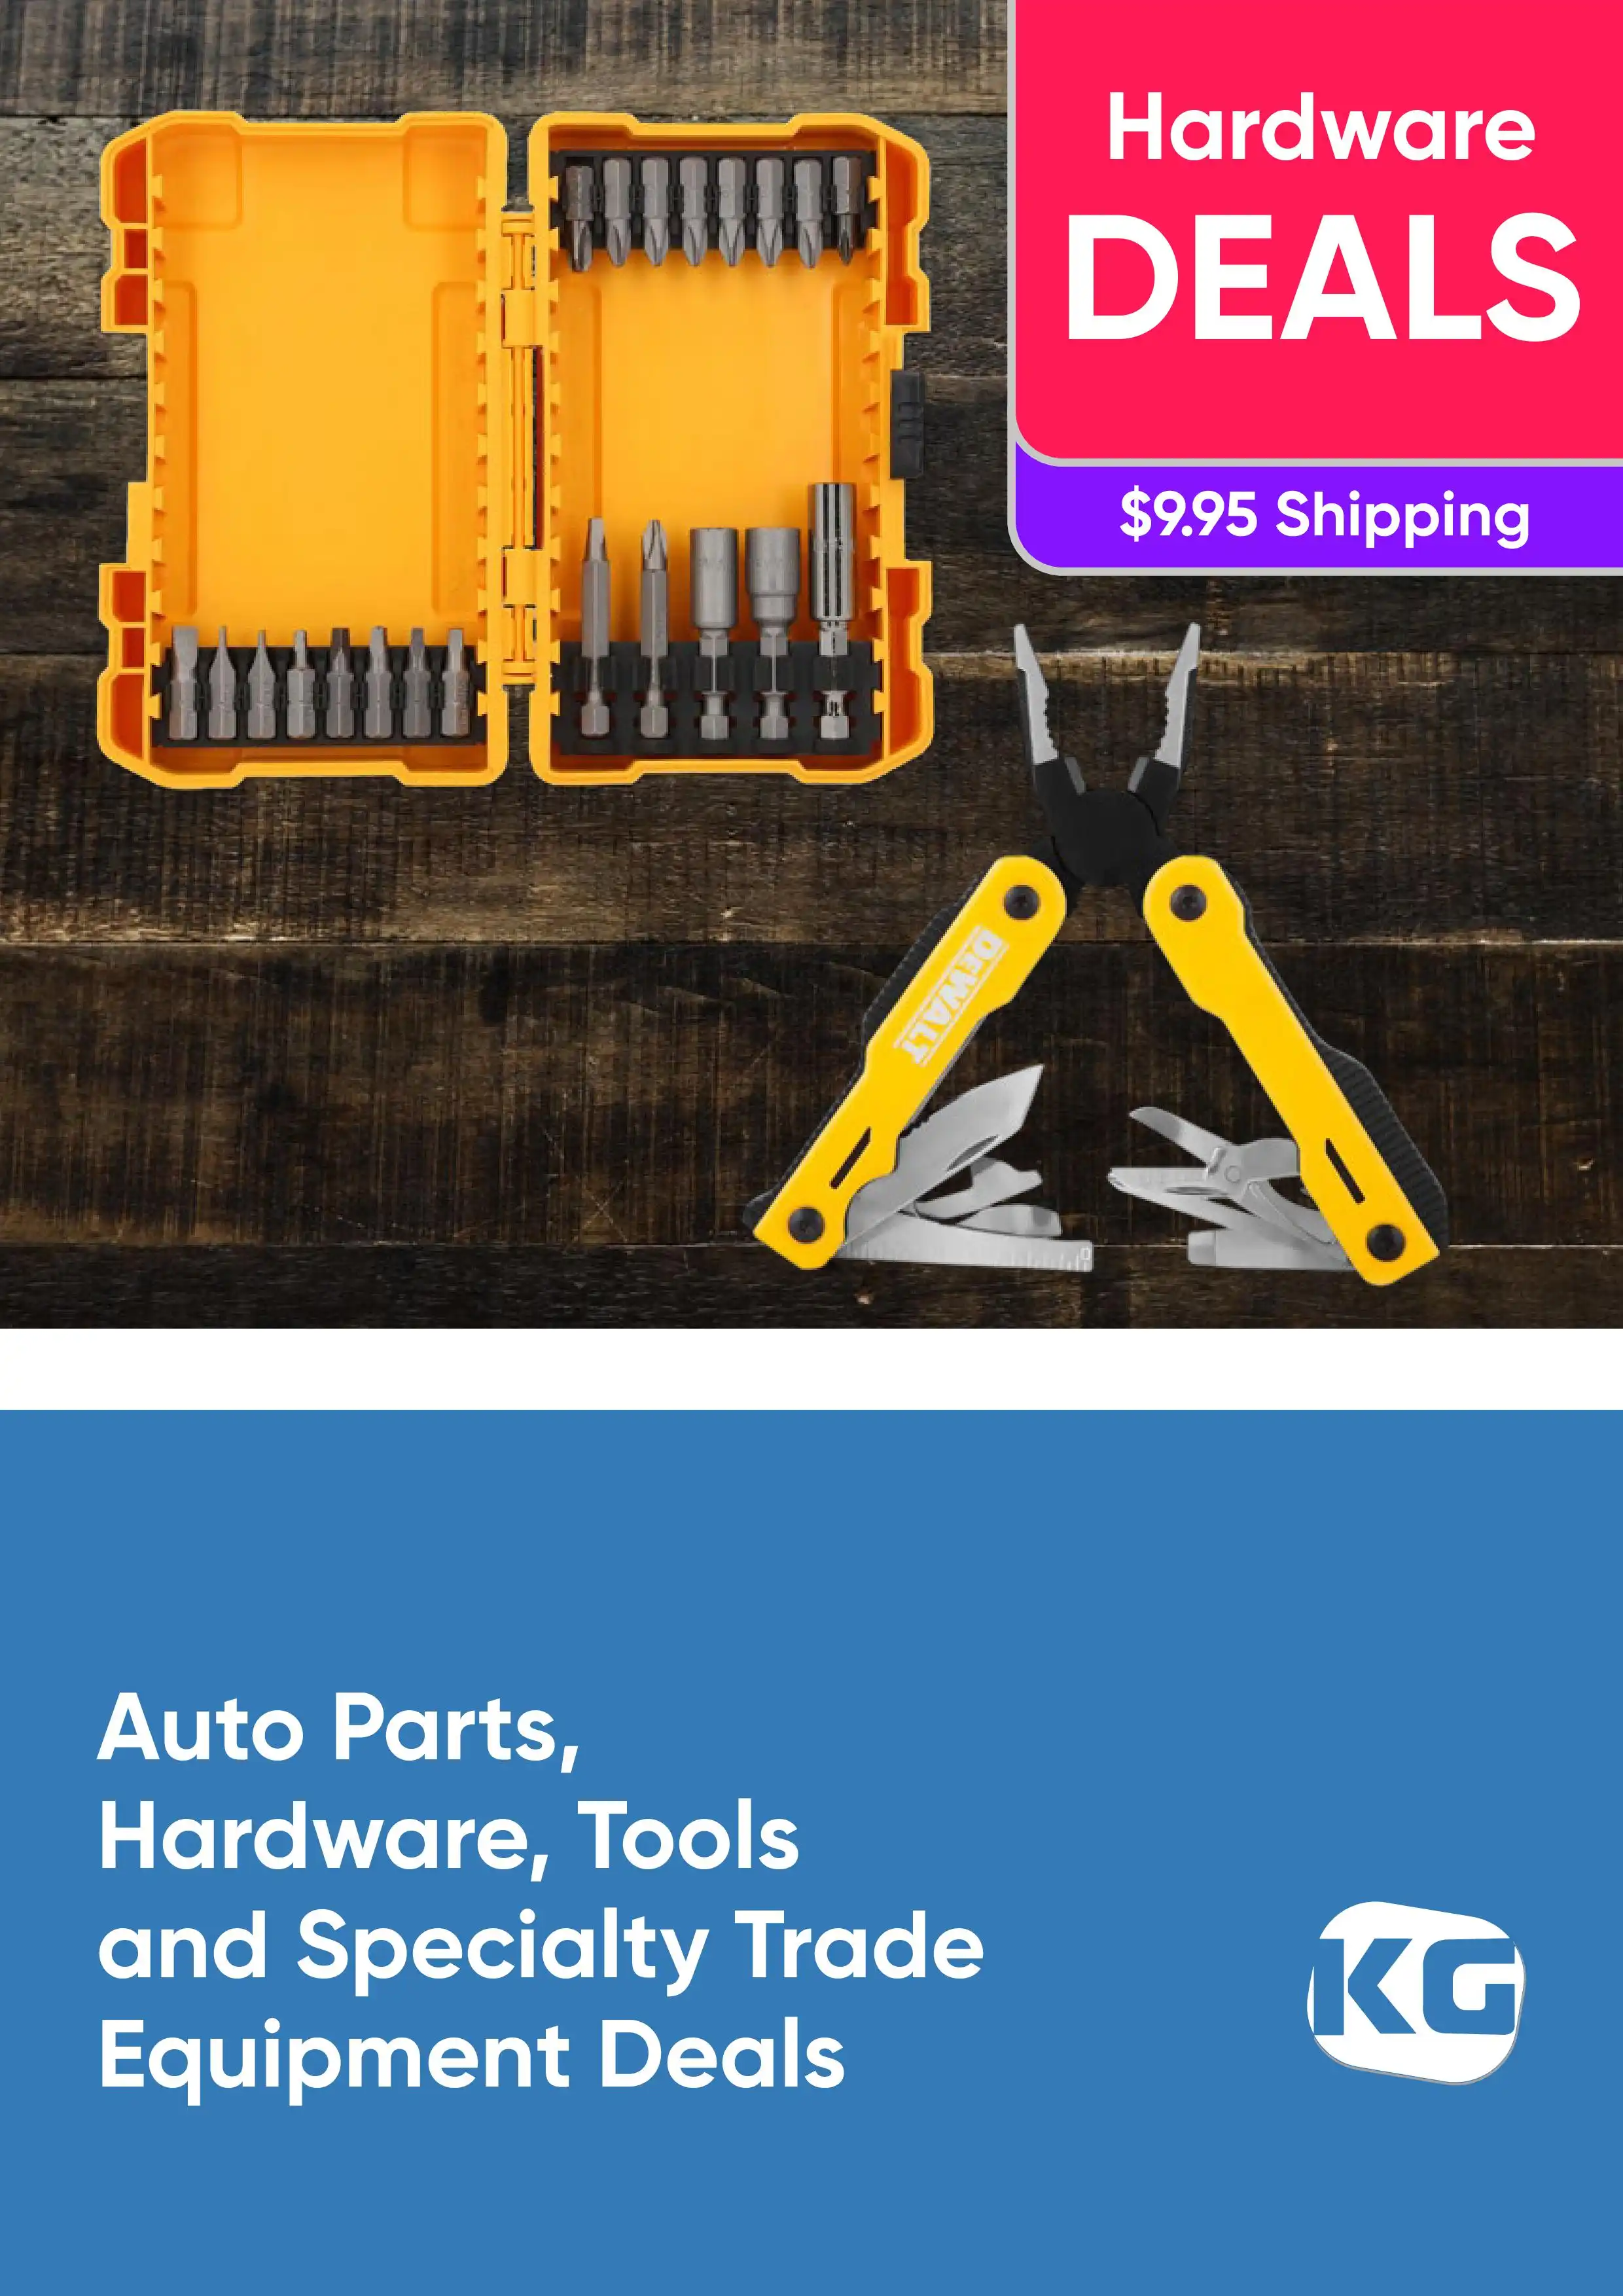 Auto Parts, Hardware, Tools and Specialty Trade Equipment Deals